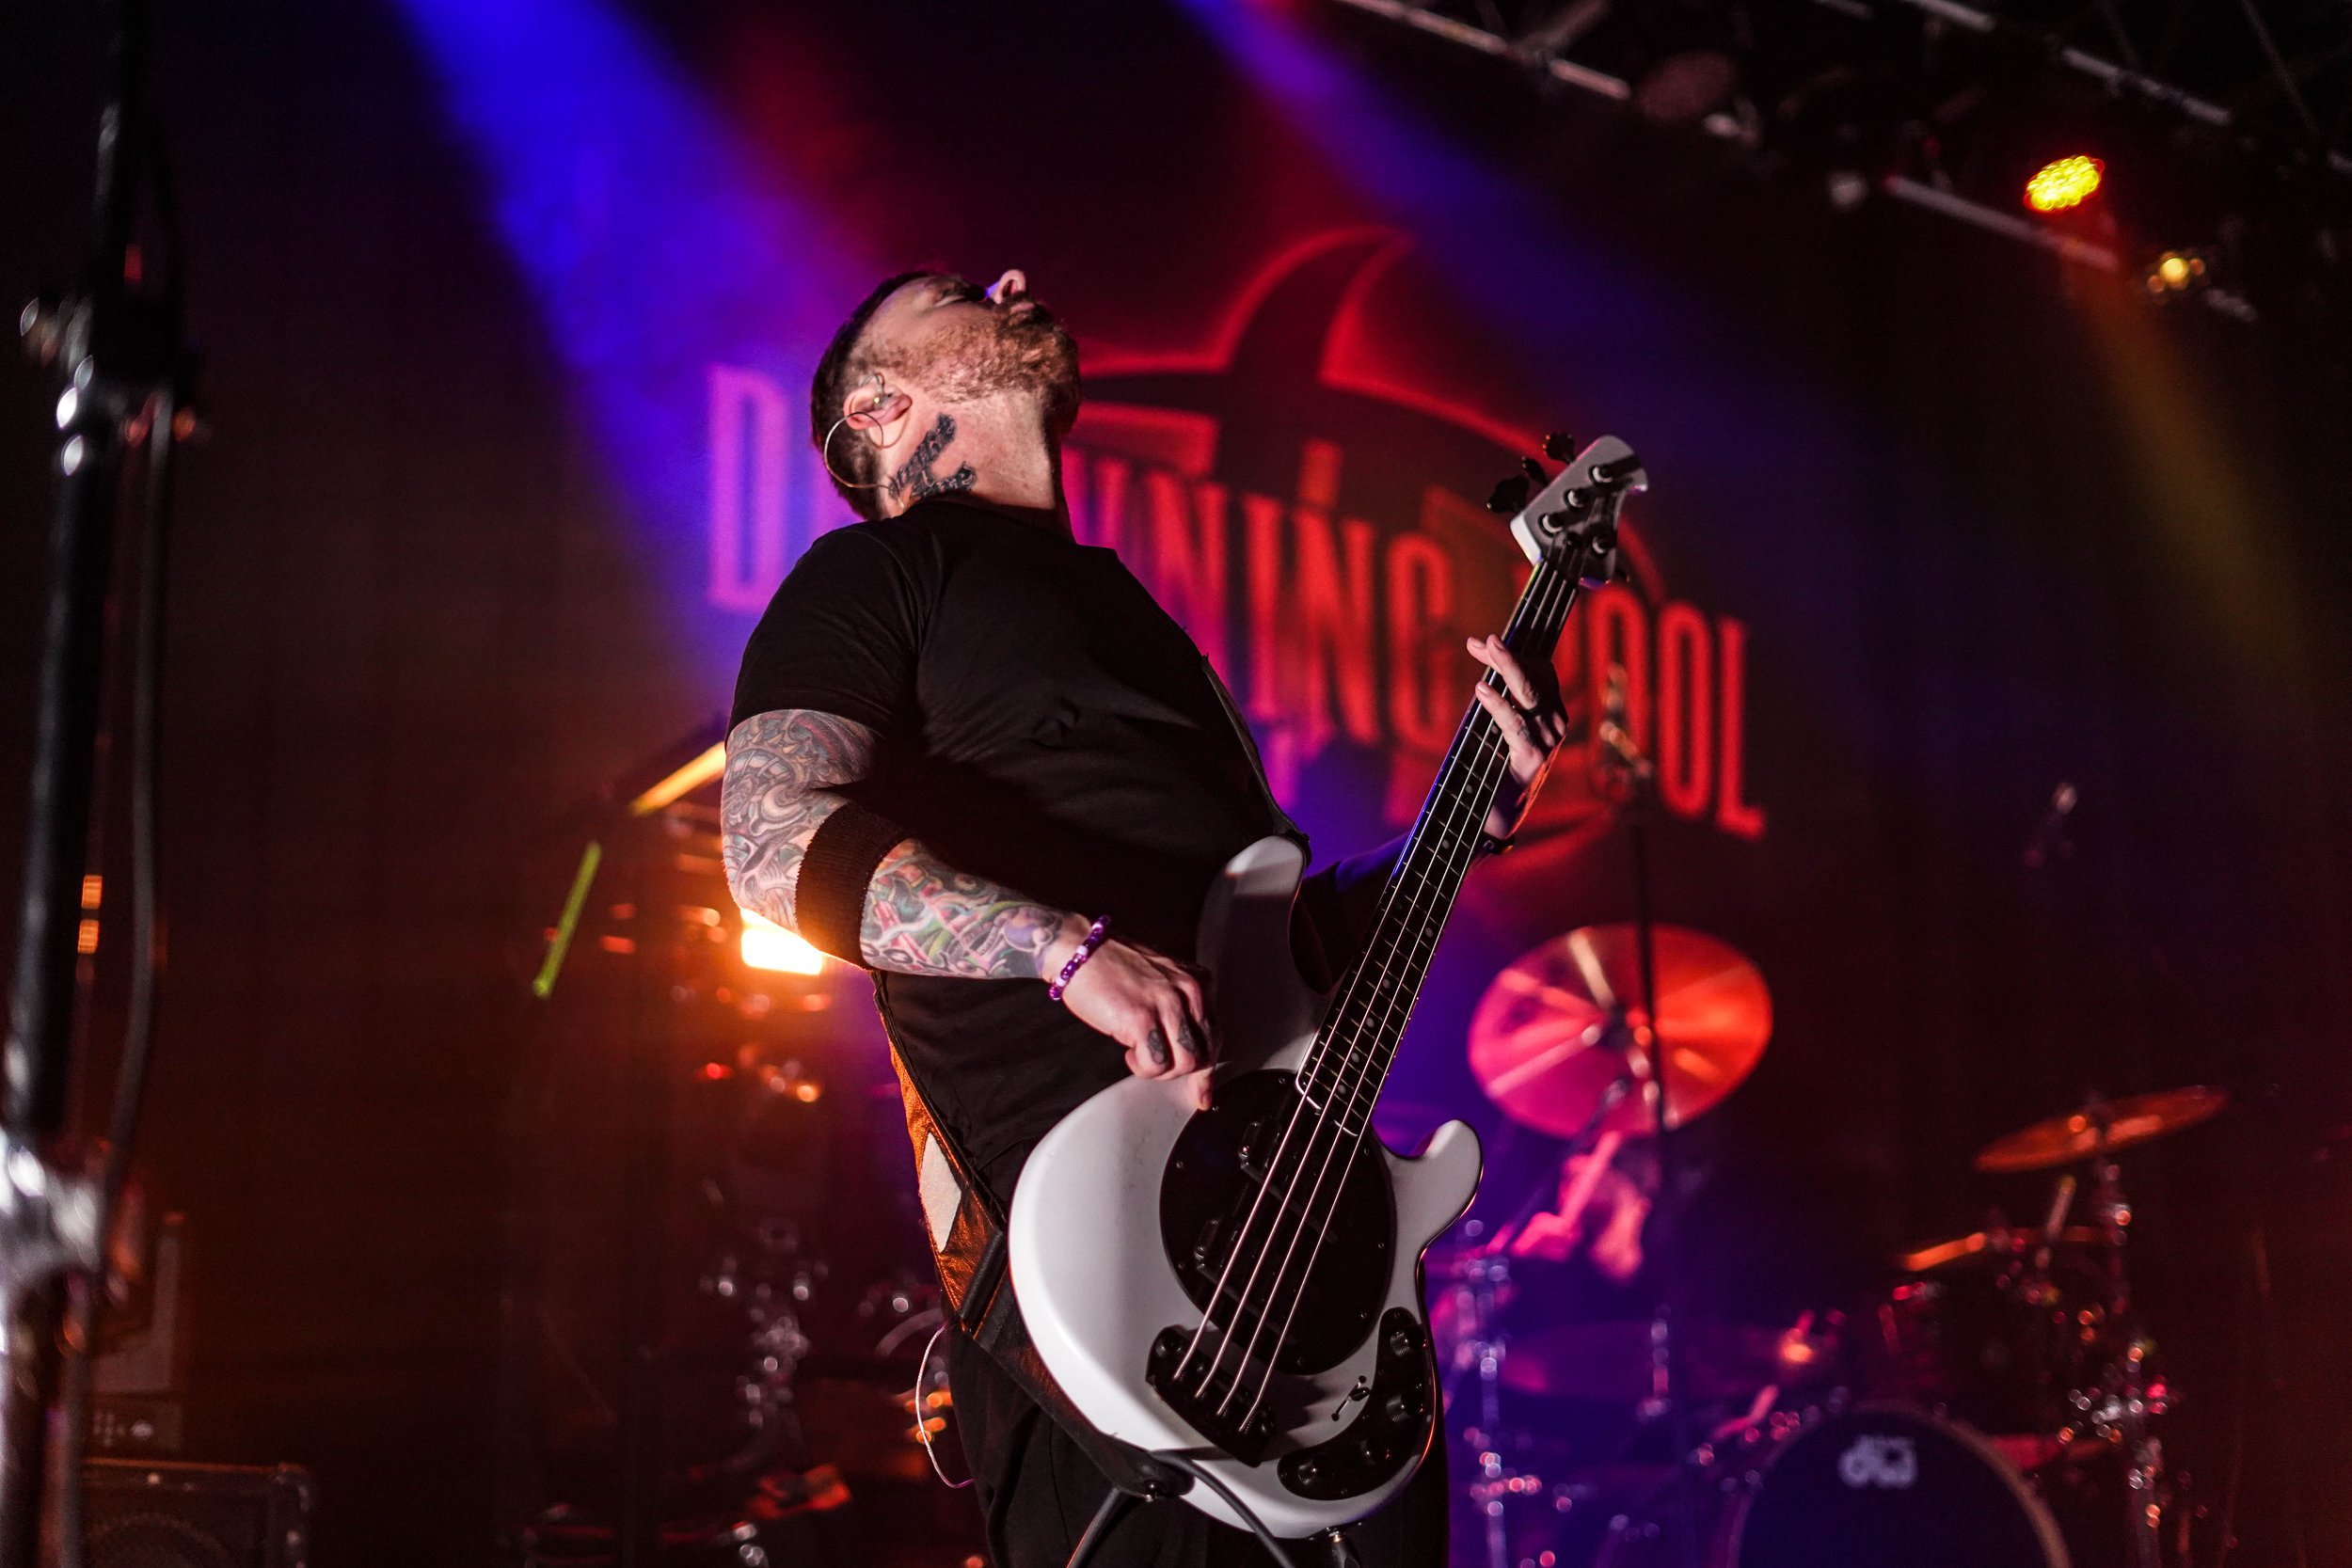 Drowning Pool at Center Stage